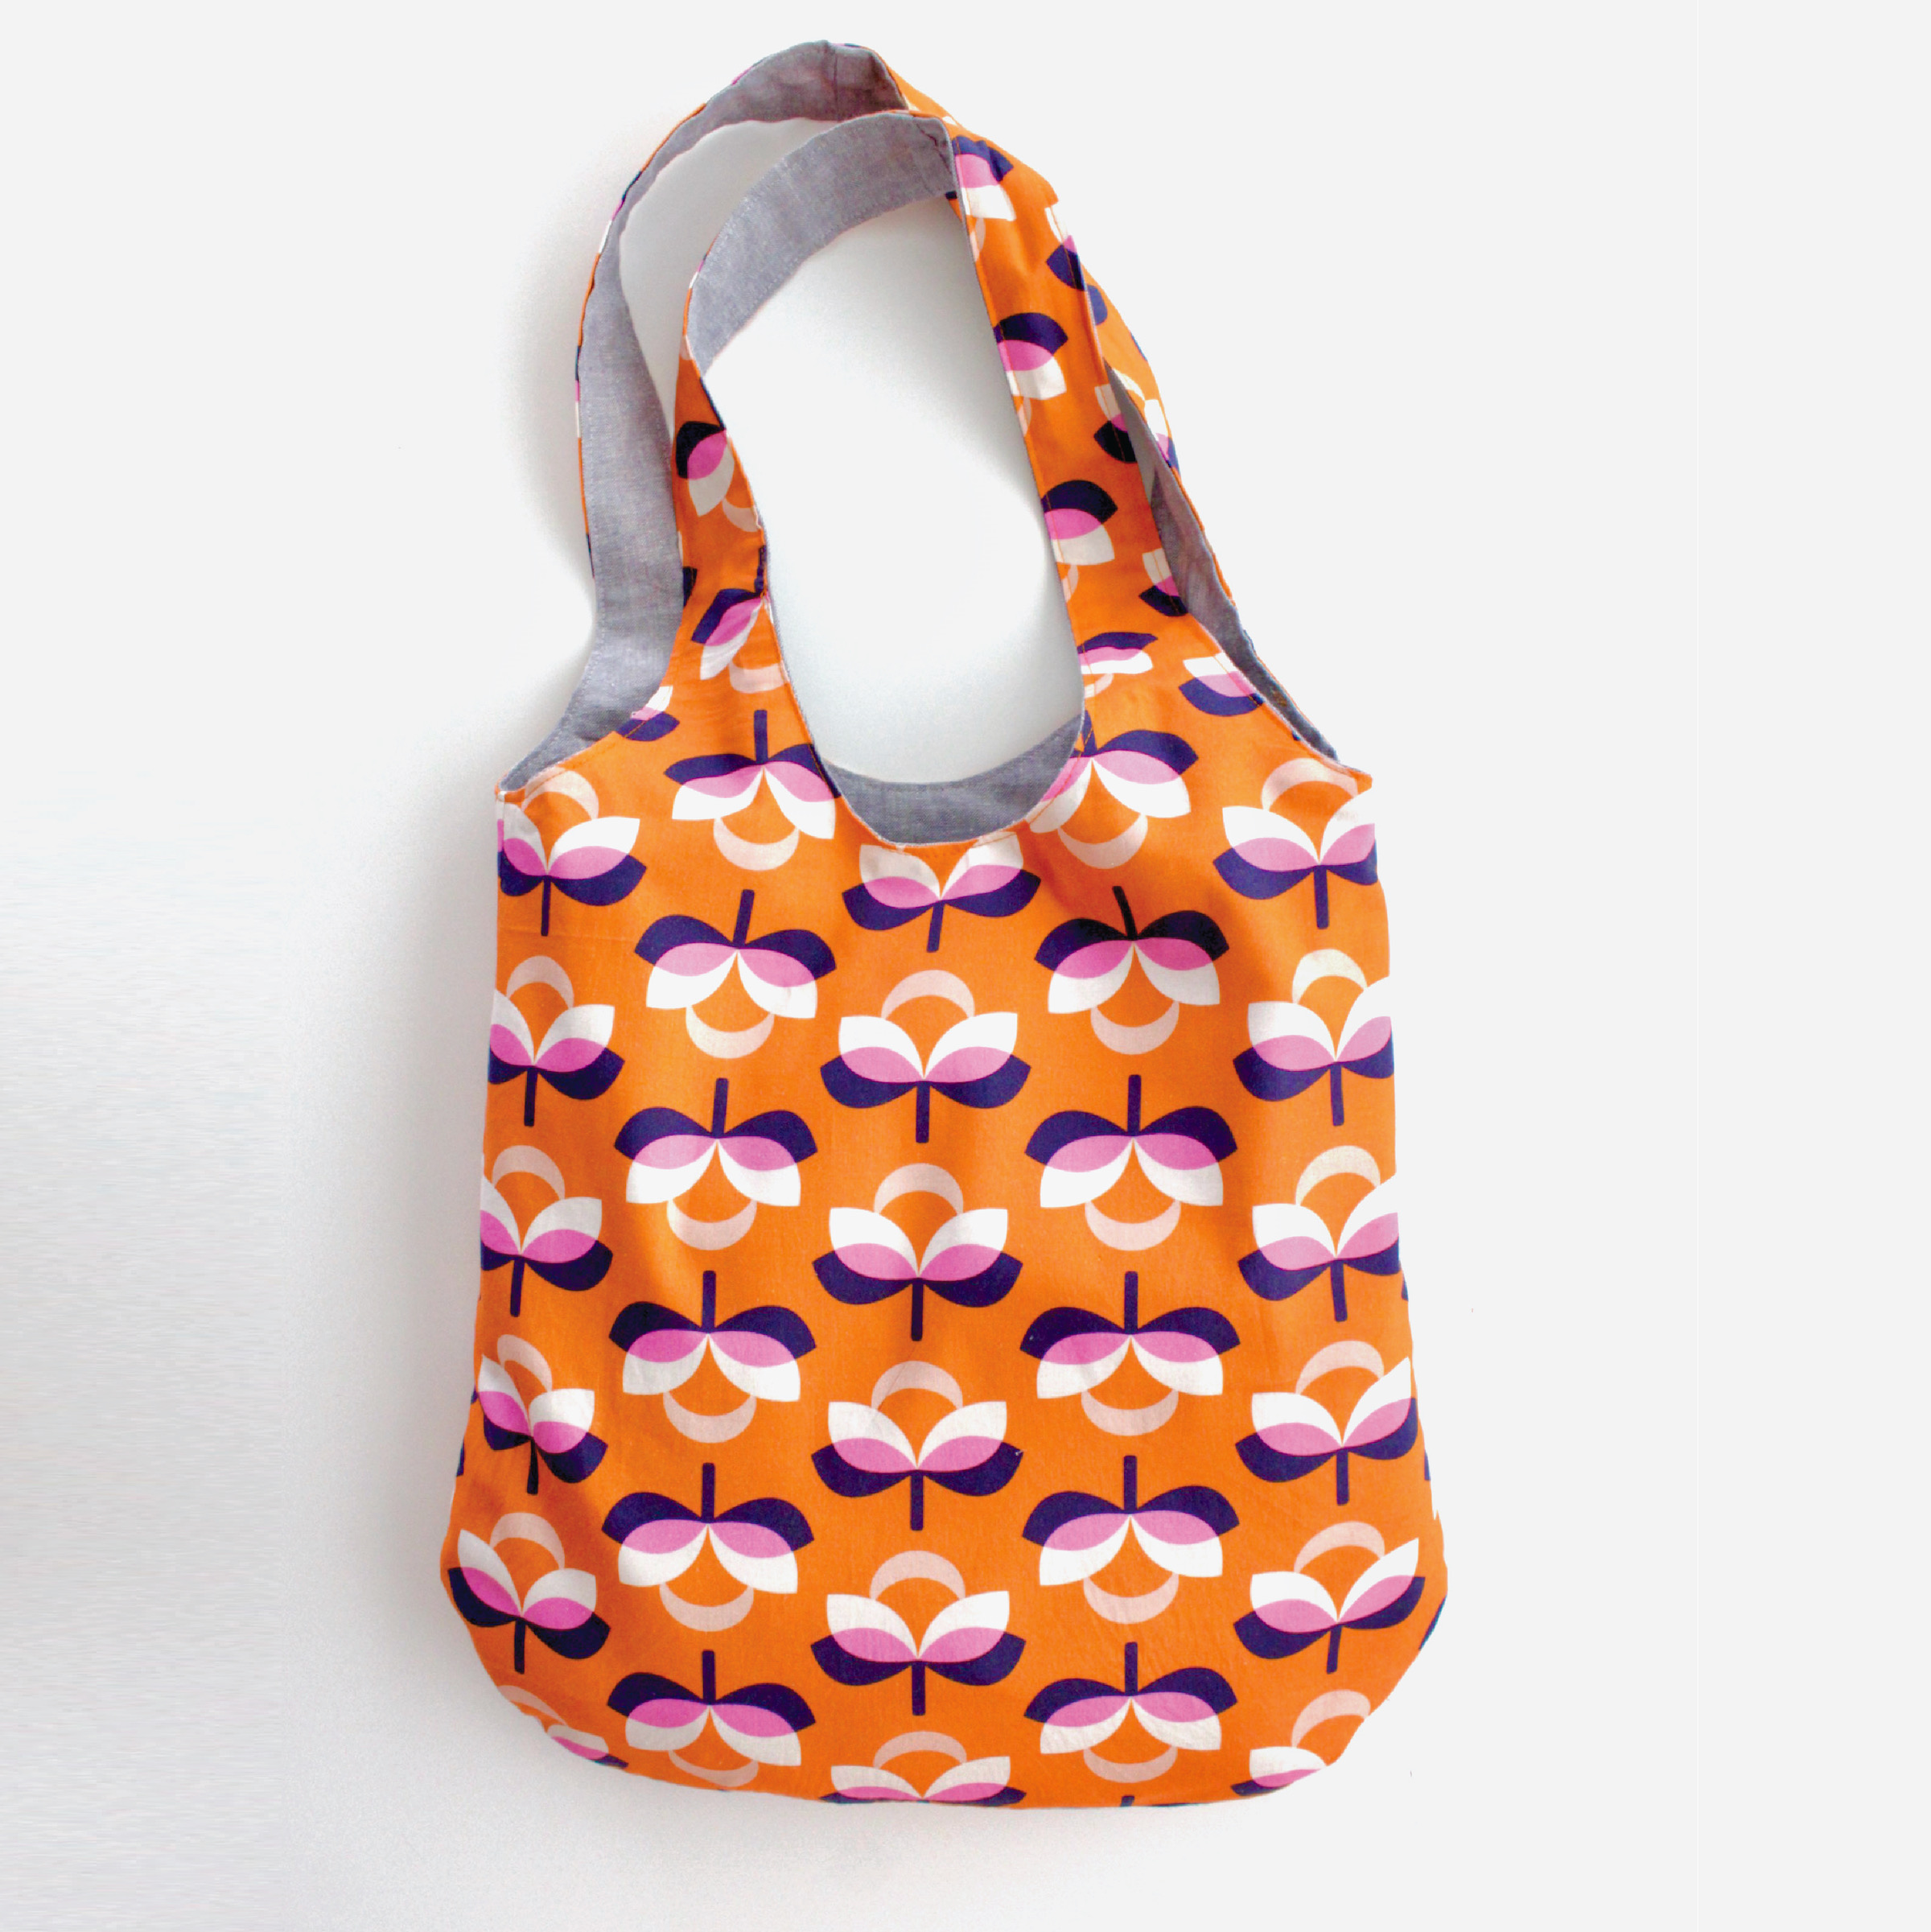 How to Sew a Reversible Hobo Bag with Mx Domestic 